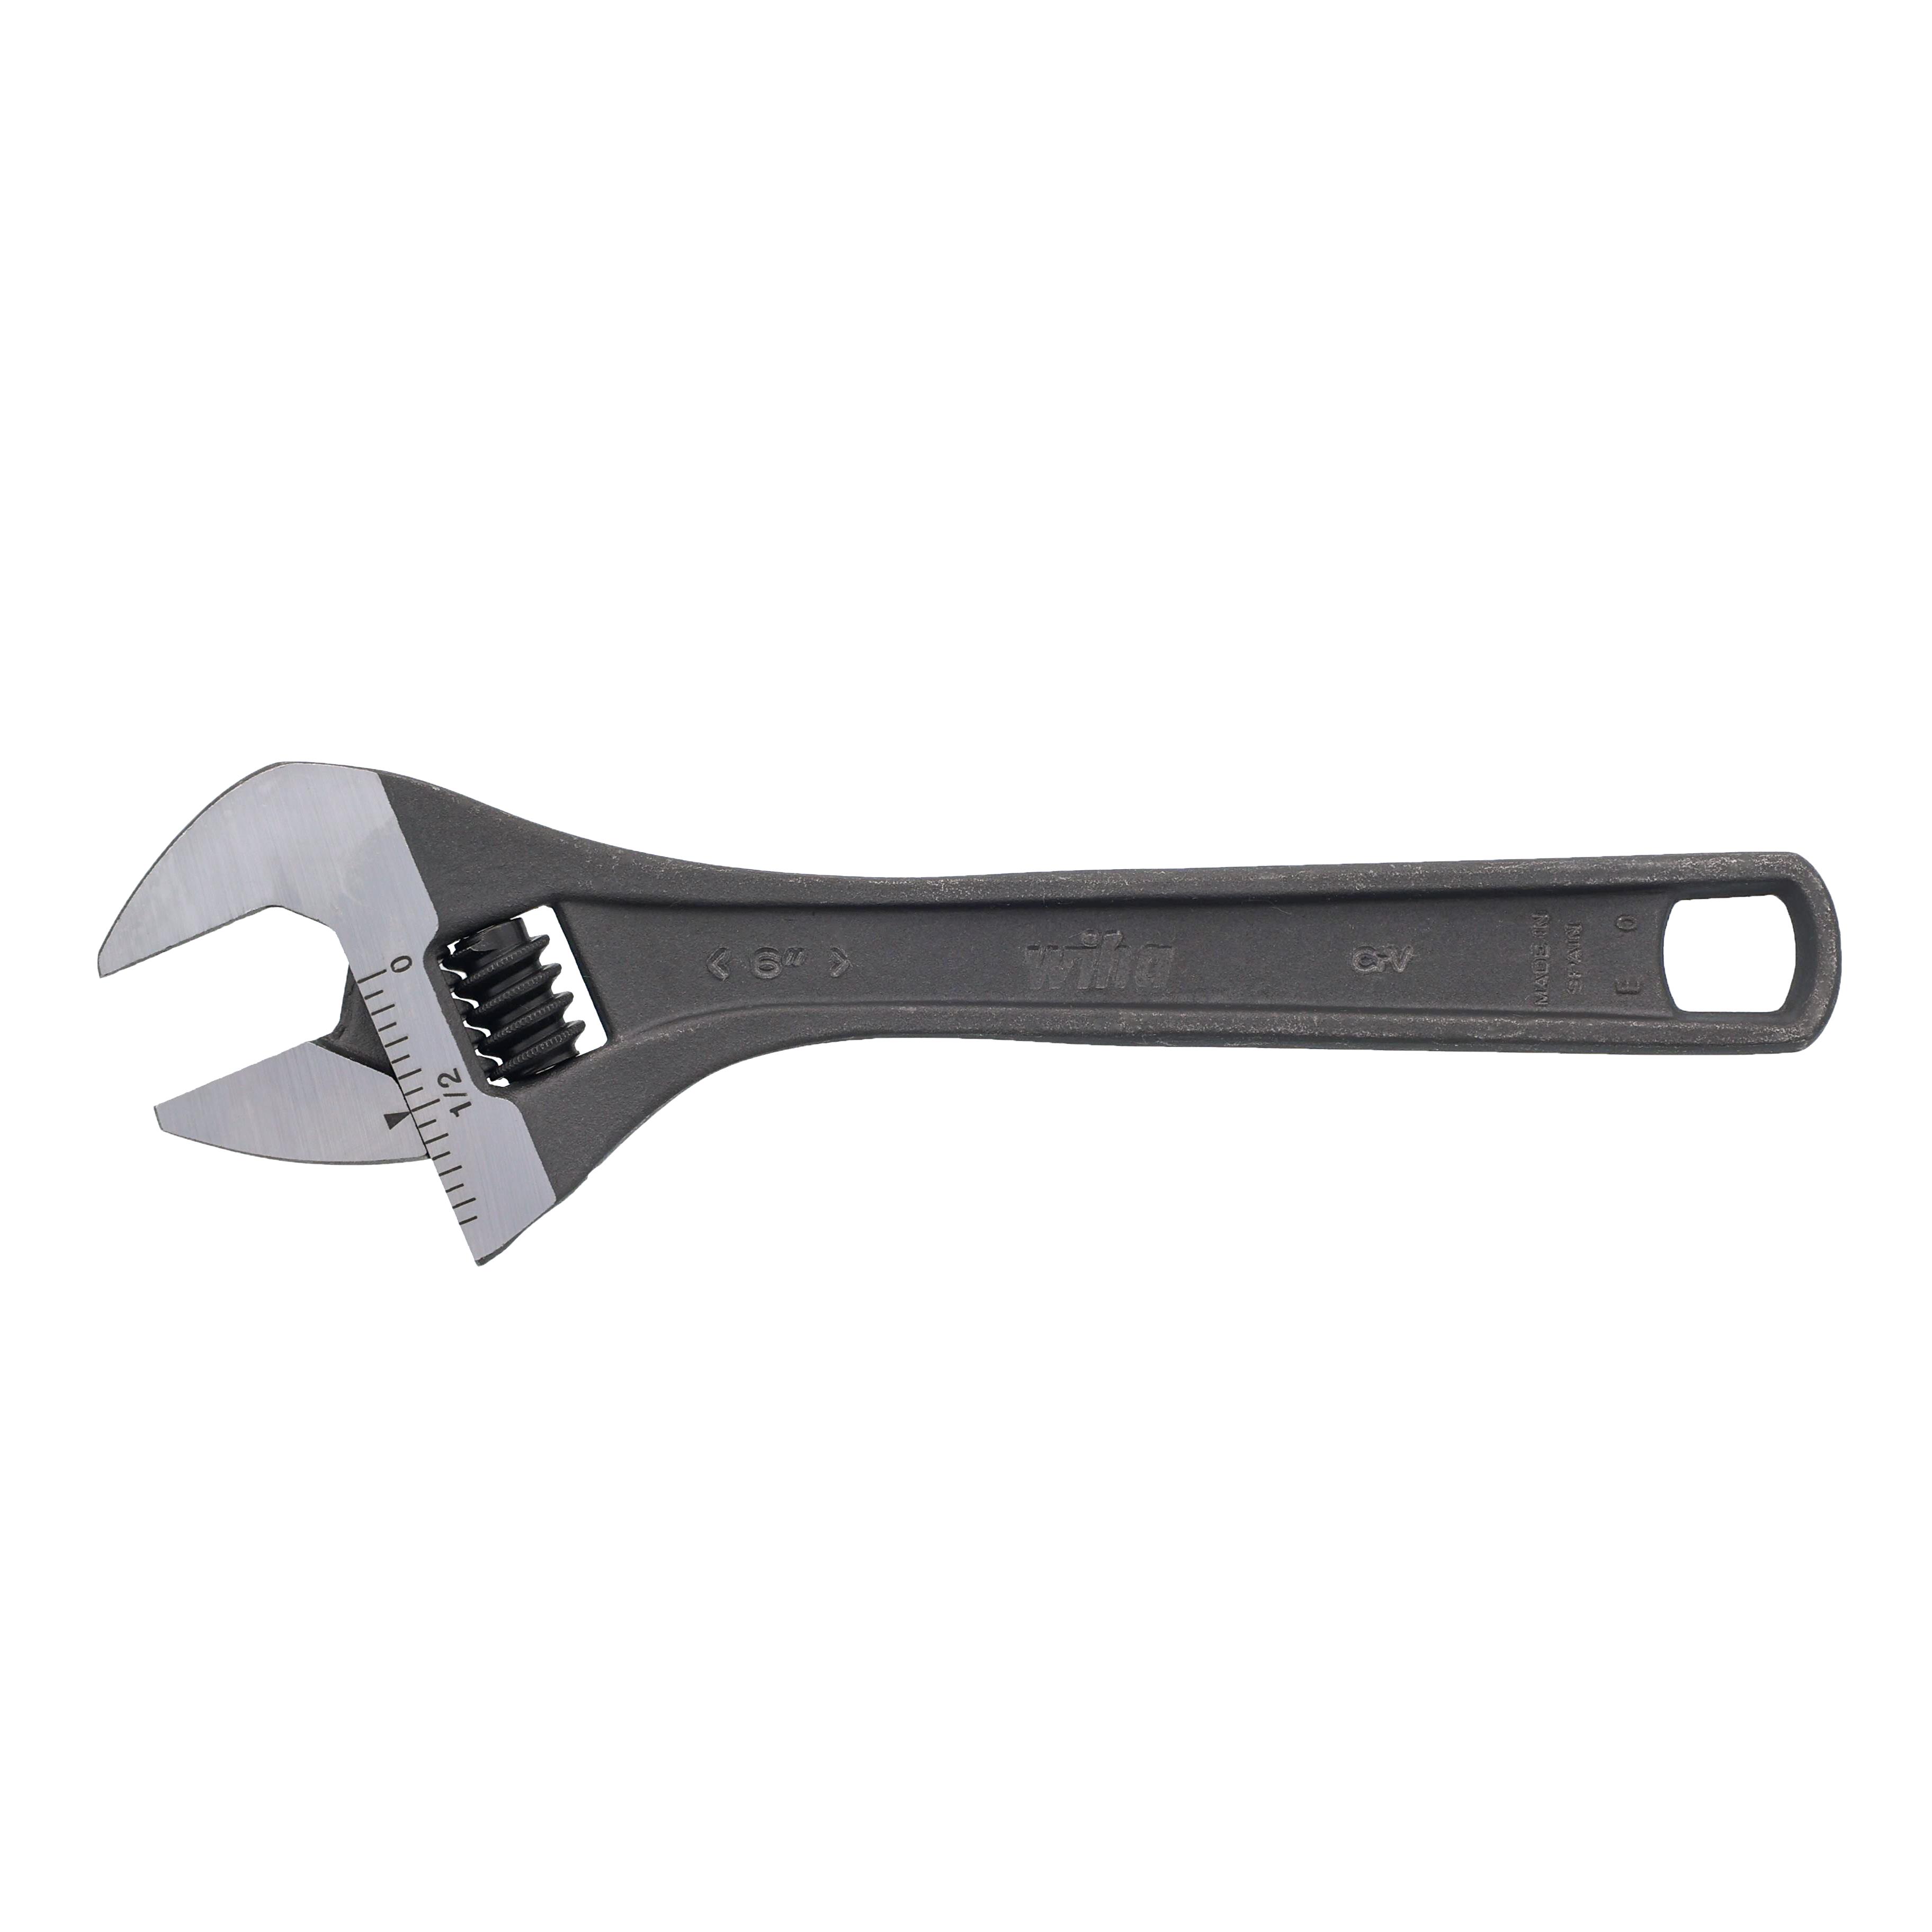 【76200】ADJUSTABLE WRENCH 6"